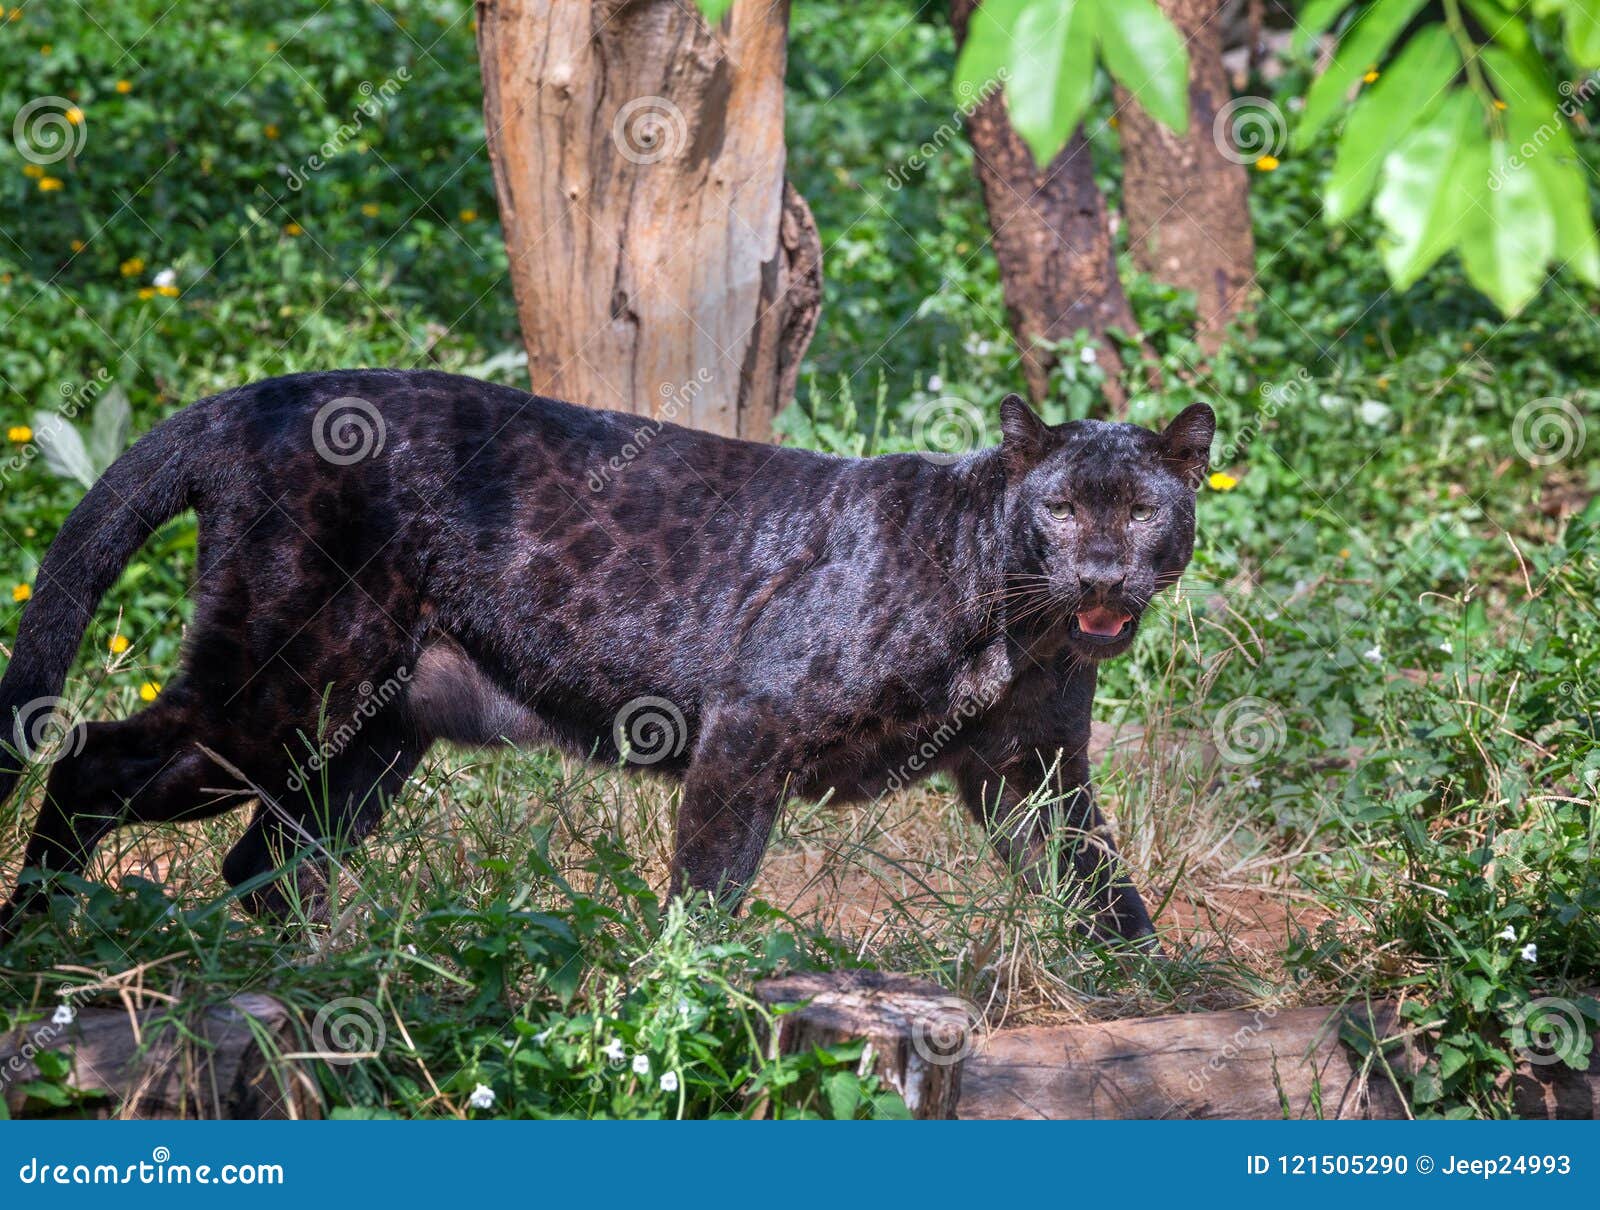 black panther in nature.